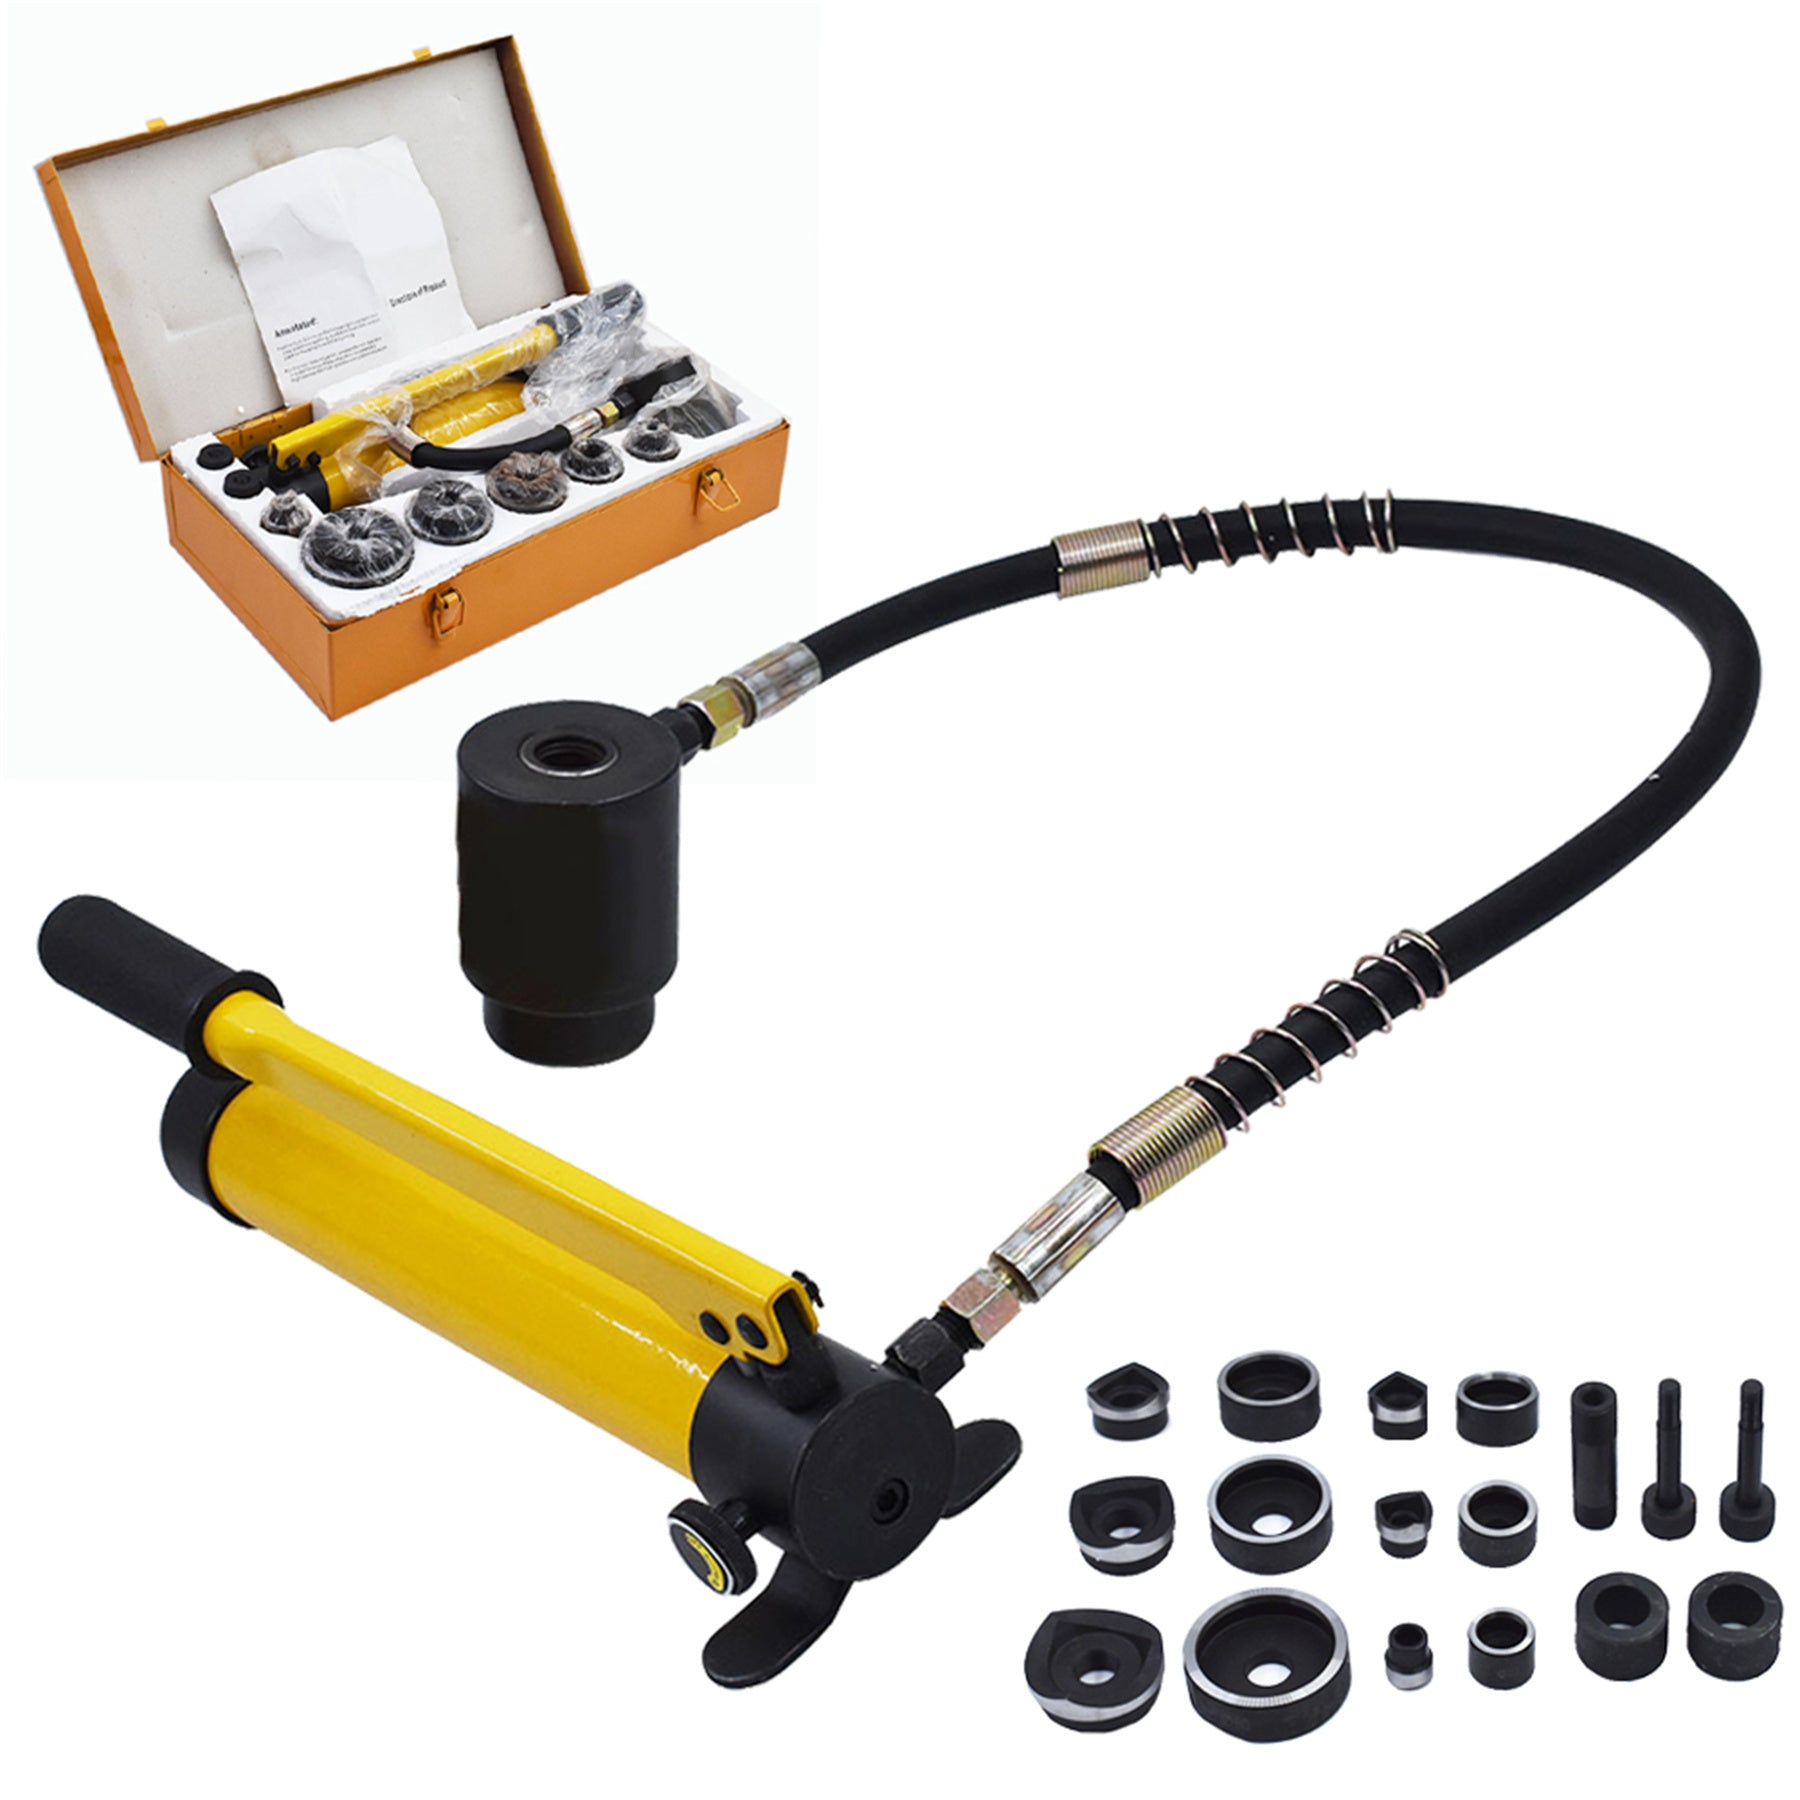 findmall 10 Ton 1/2" to 2" Hydraulic Knockout Punch Driver Tool With 6 Dies Kit Findmall